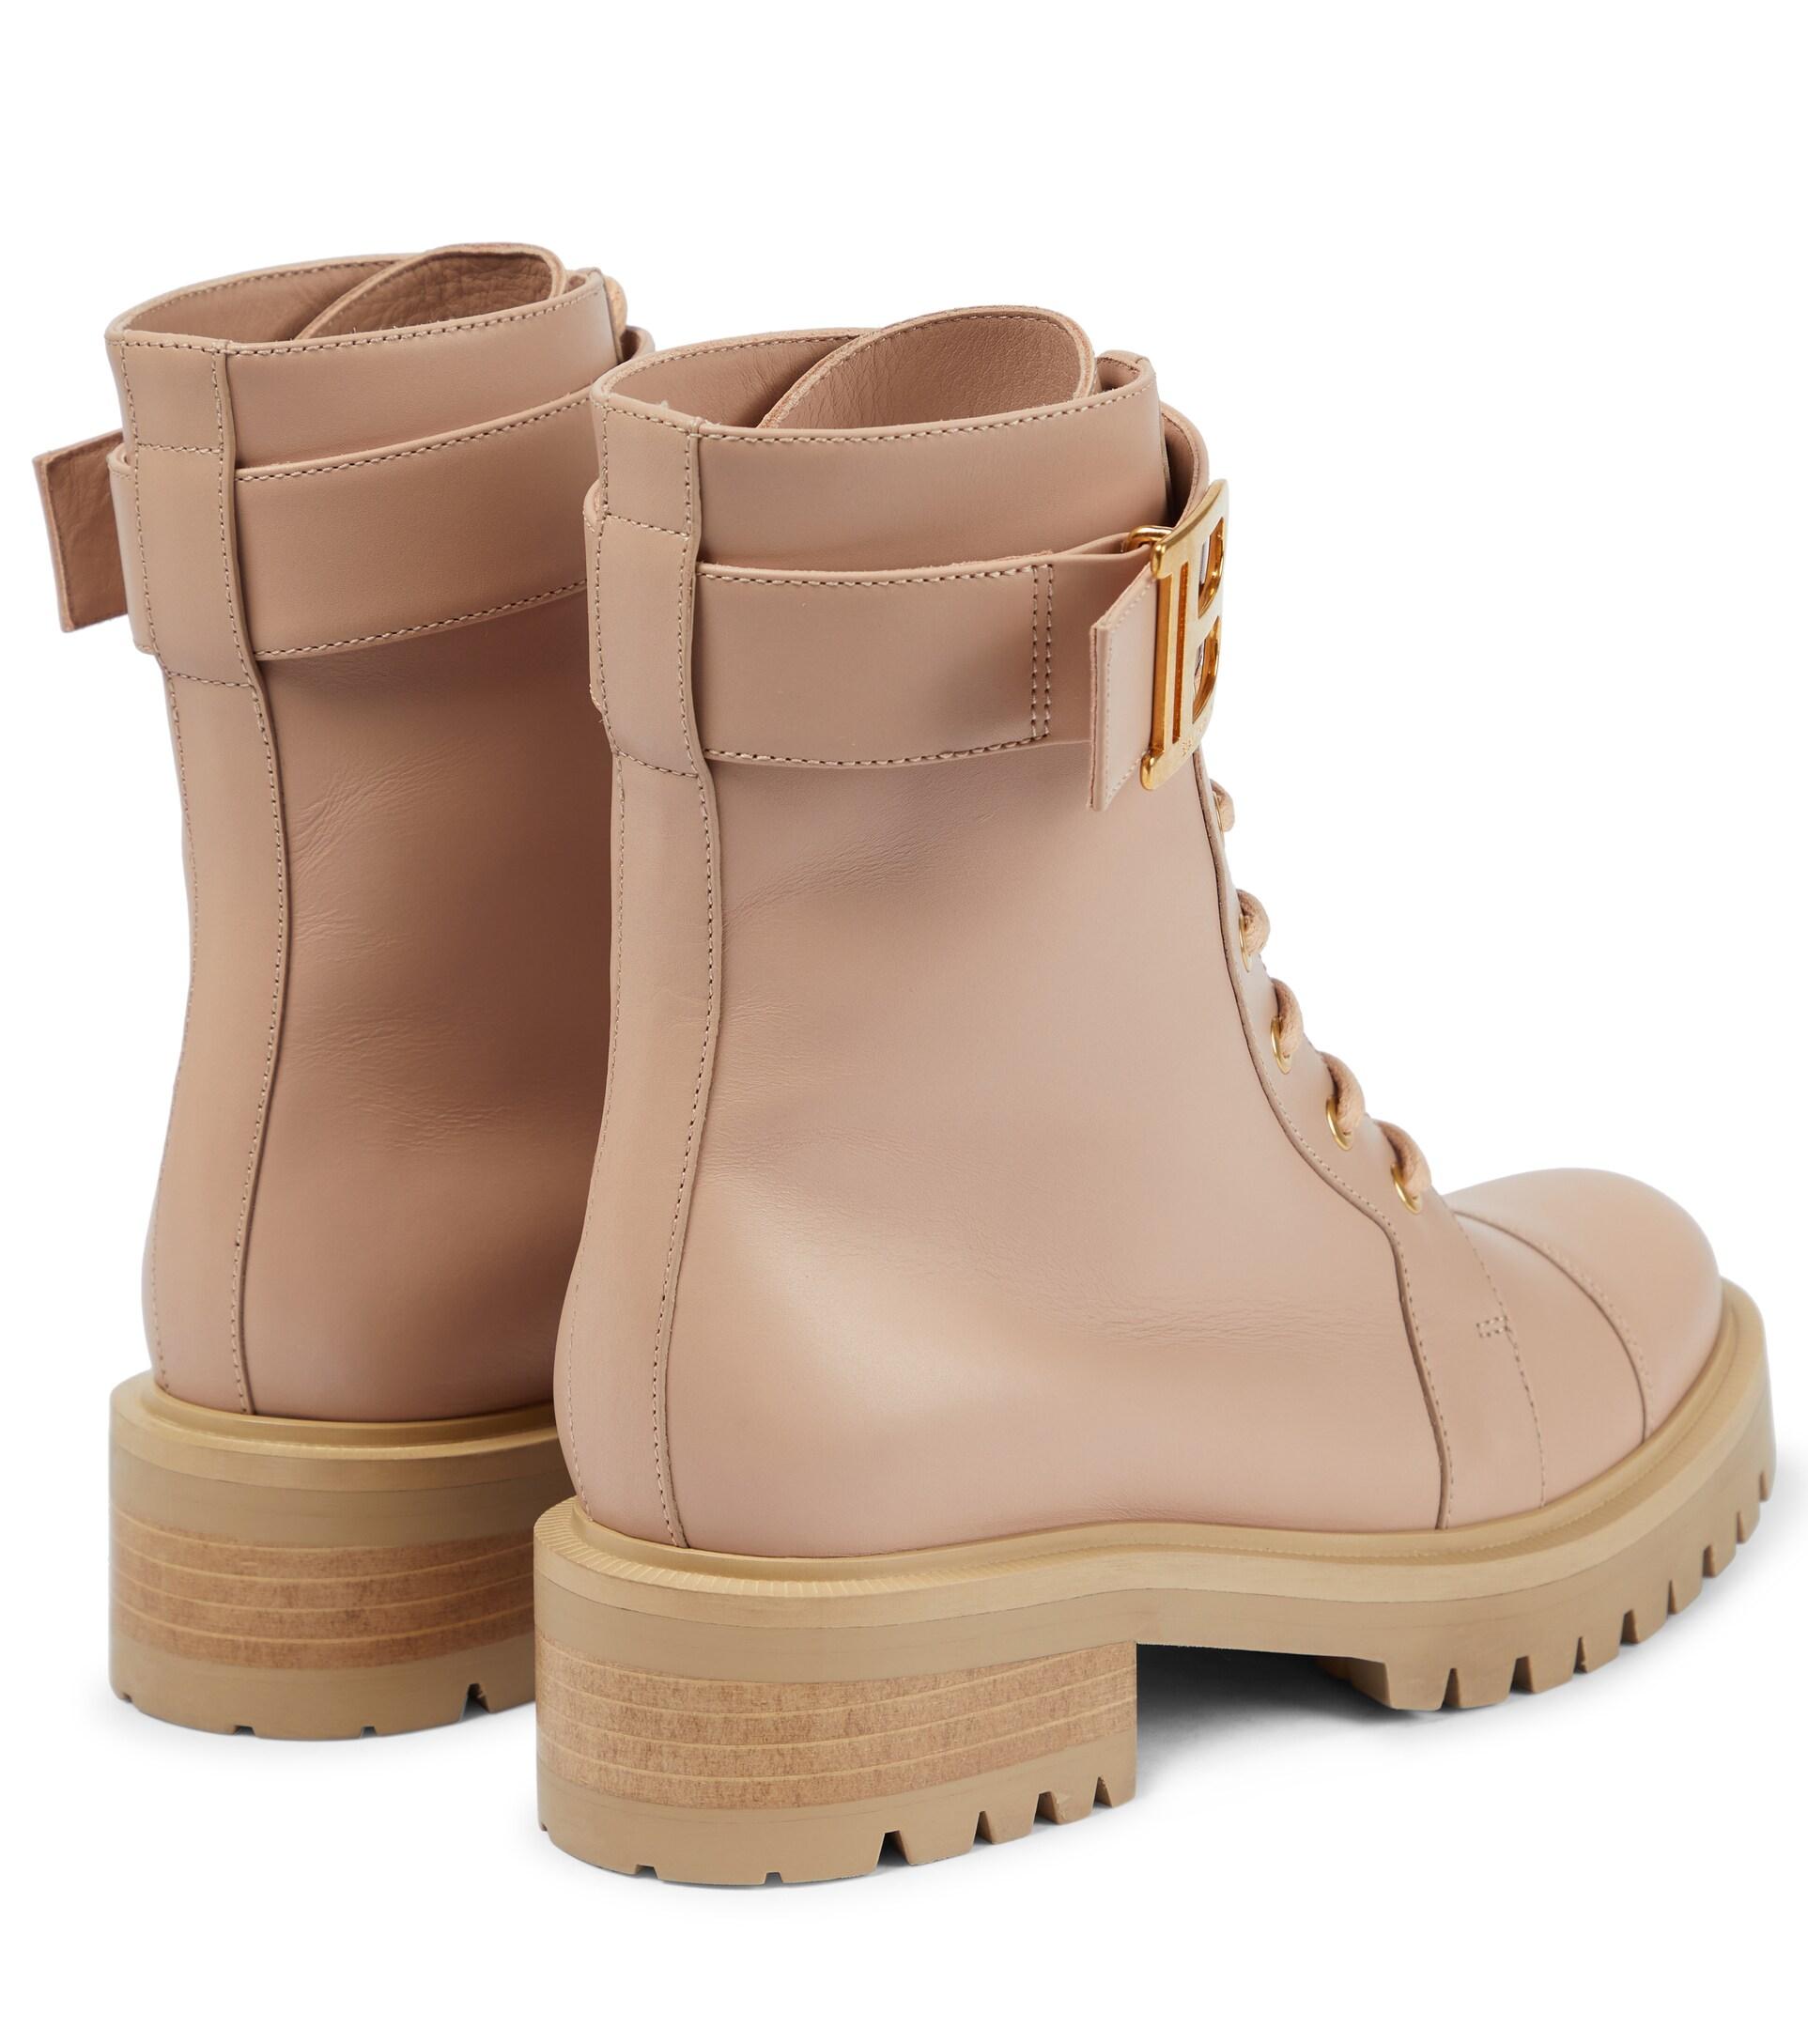 Balmain Ranger Leather Ankle Boots in Natural | Lyst